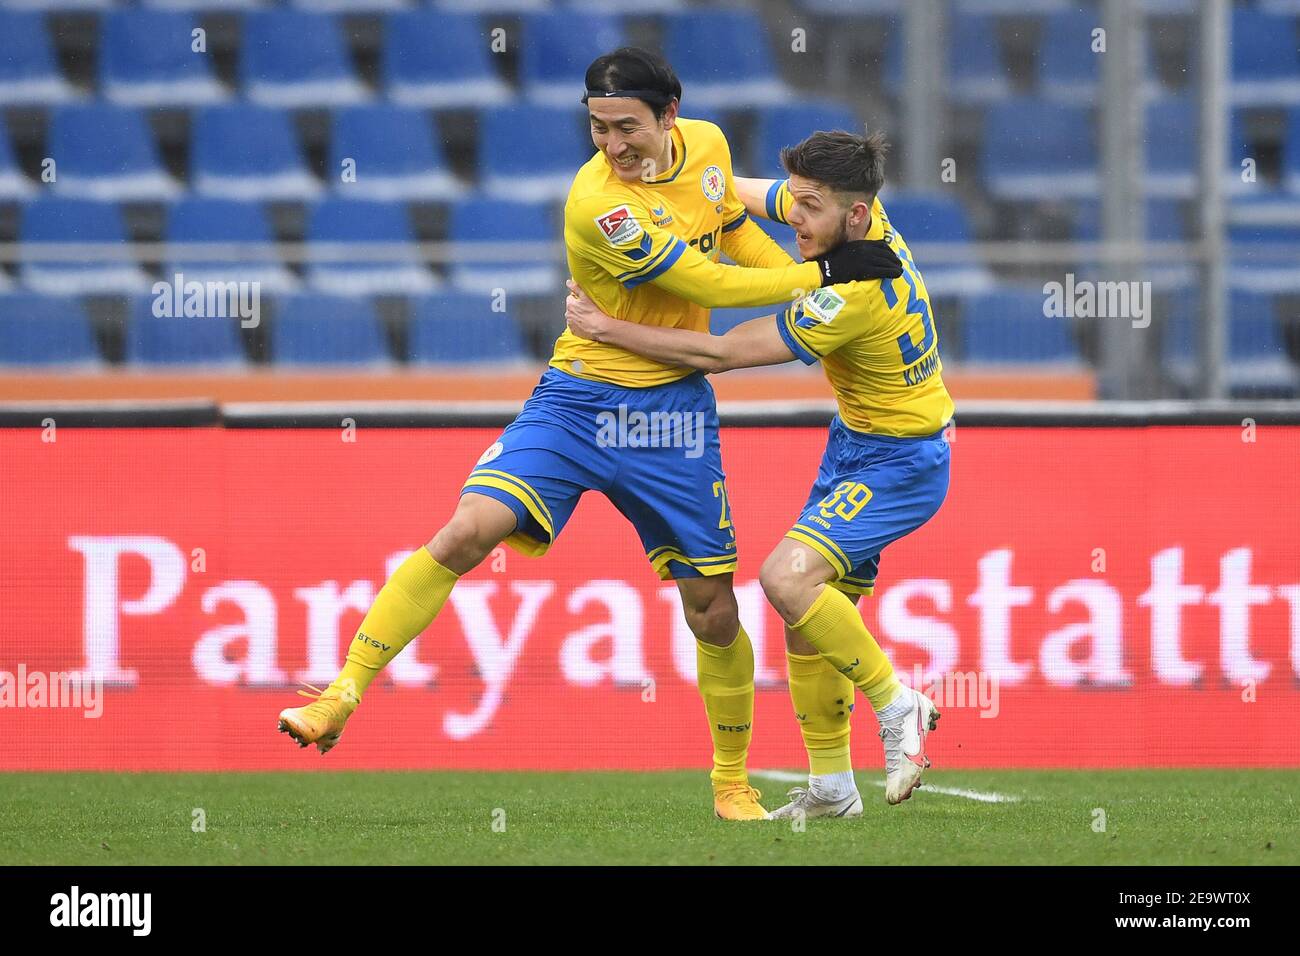 Brunswick, Germany. 06th Feb, 2021. Football: 2. Bundesliga, Eintracht Braunschweig - Hannover 96, Matchday 20 at Eintracht-Stadion. Braunschweig's Dong Won Ji (l) celebrates with Braunschweig's Patrick Kammerbauer after his goal for 1:0. Credit: Swen Pförtner/dpa - IMPORTANT NOTE: In accordance with the regulations of the DFL Deutsche Fußball Liga and/or the DFB Deutscher Fußball-Bund, it is prohibited to use or have used photographs taken in the stadium and/or of the match in the form of sequence pictures and/or video-like photo series./dpa/Alamy Live News Stock Photo